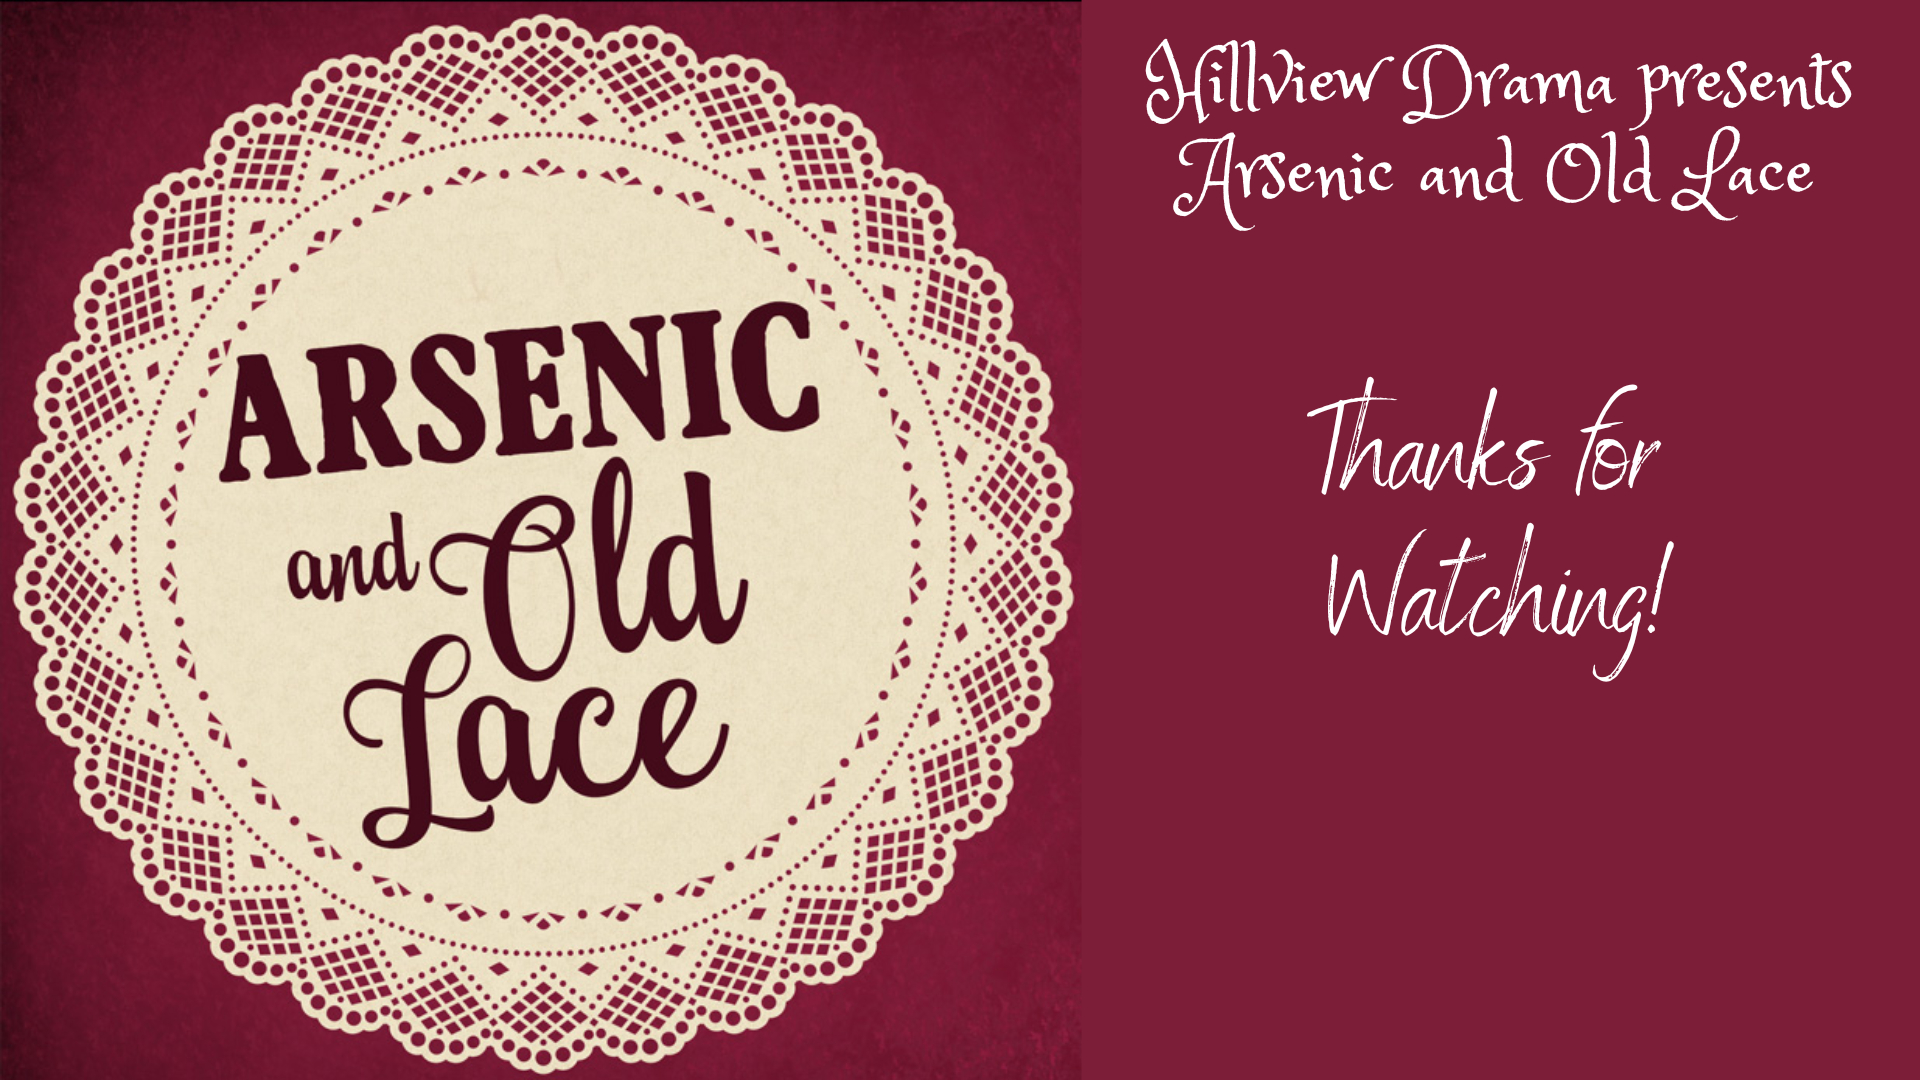 Hillview's Arsenic and Old Lace